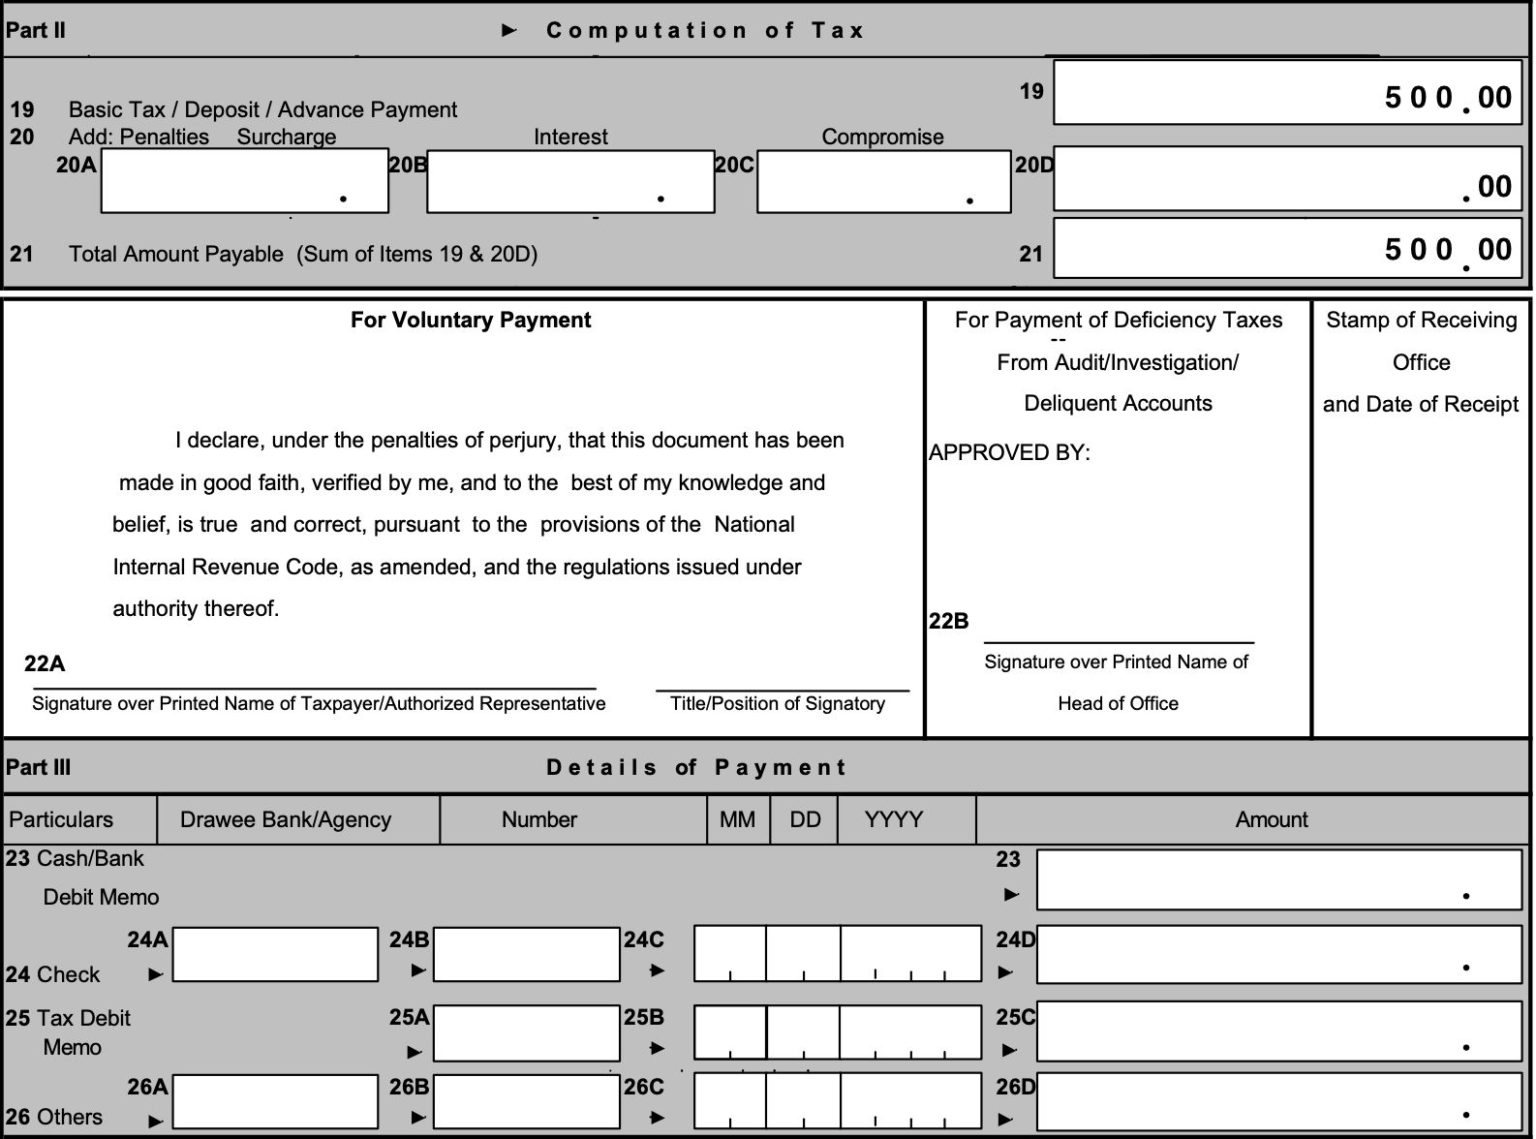 How to Fill Out BIR Form 0605 for Annual Registration Fee